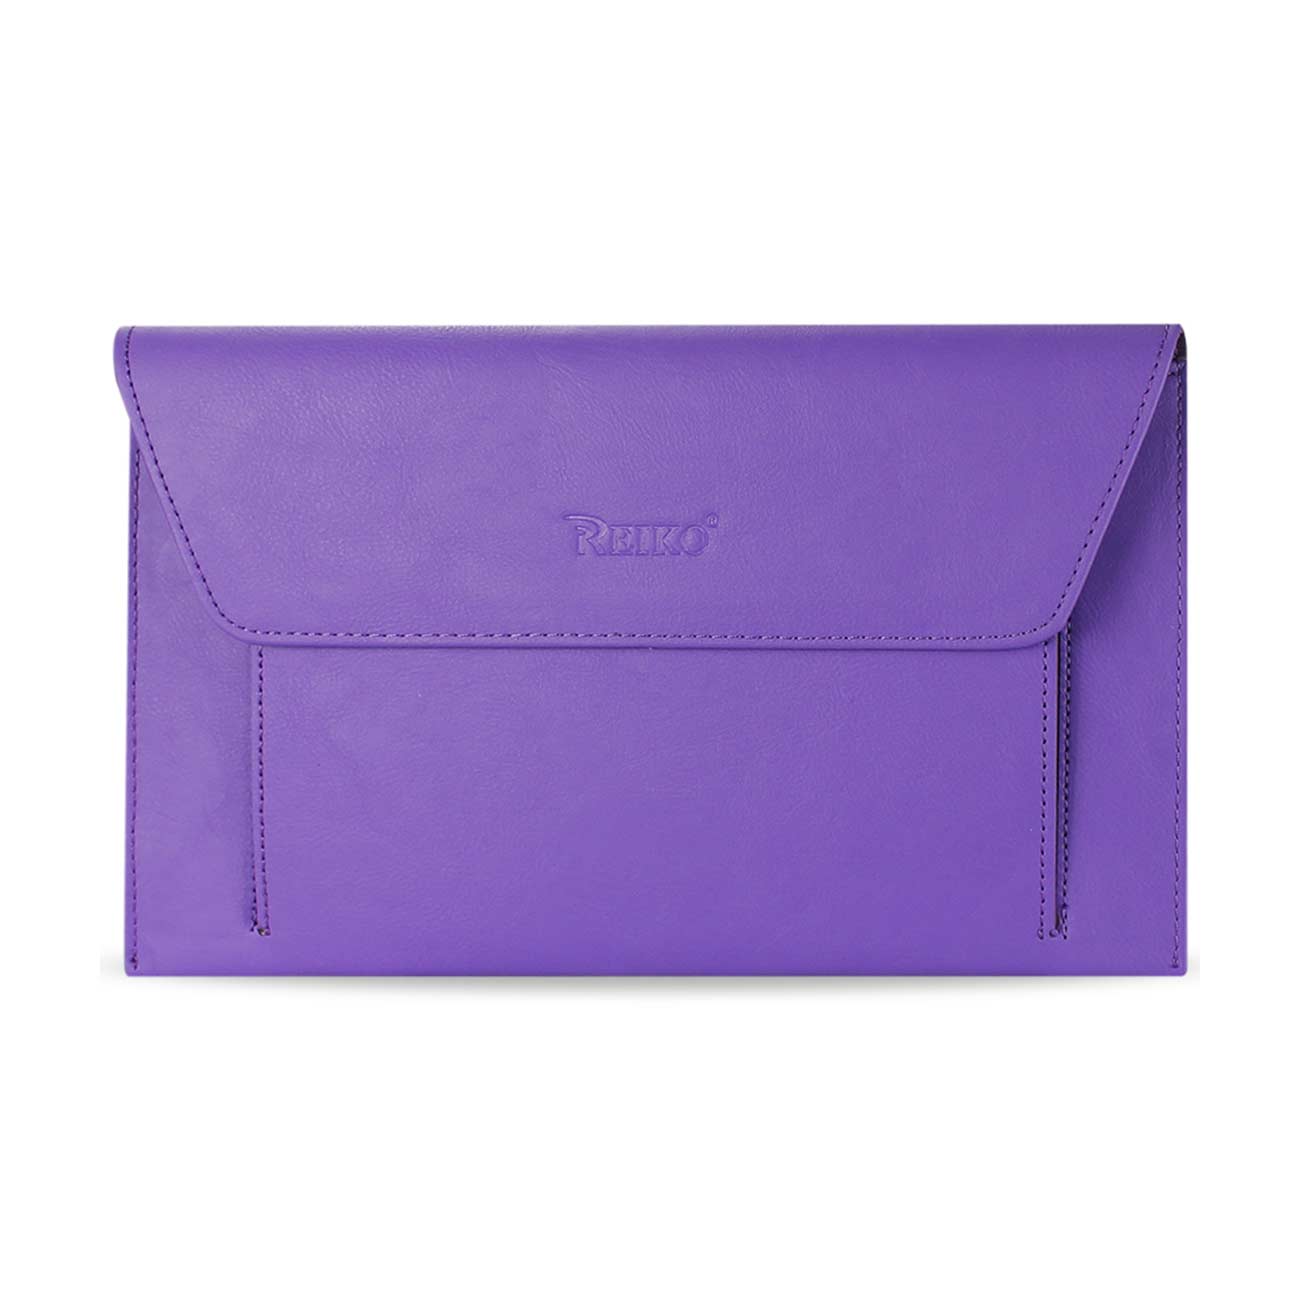 REIKO PREMIUM LEATHER CASE POUCH FOR 11.6INCHES IPADS AND TABLETS In PURPLE